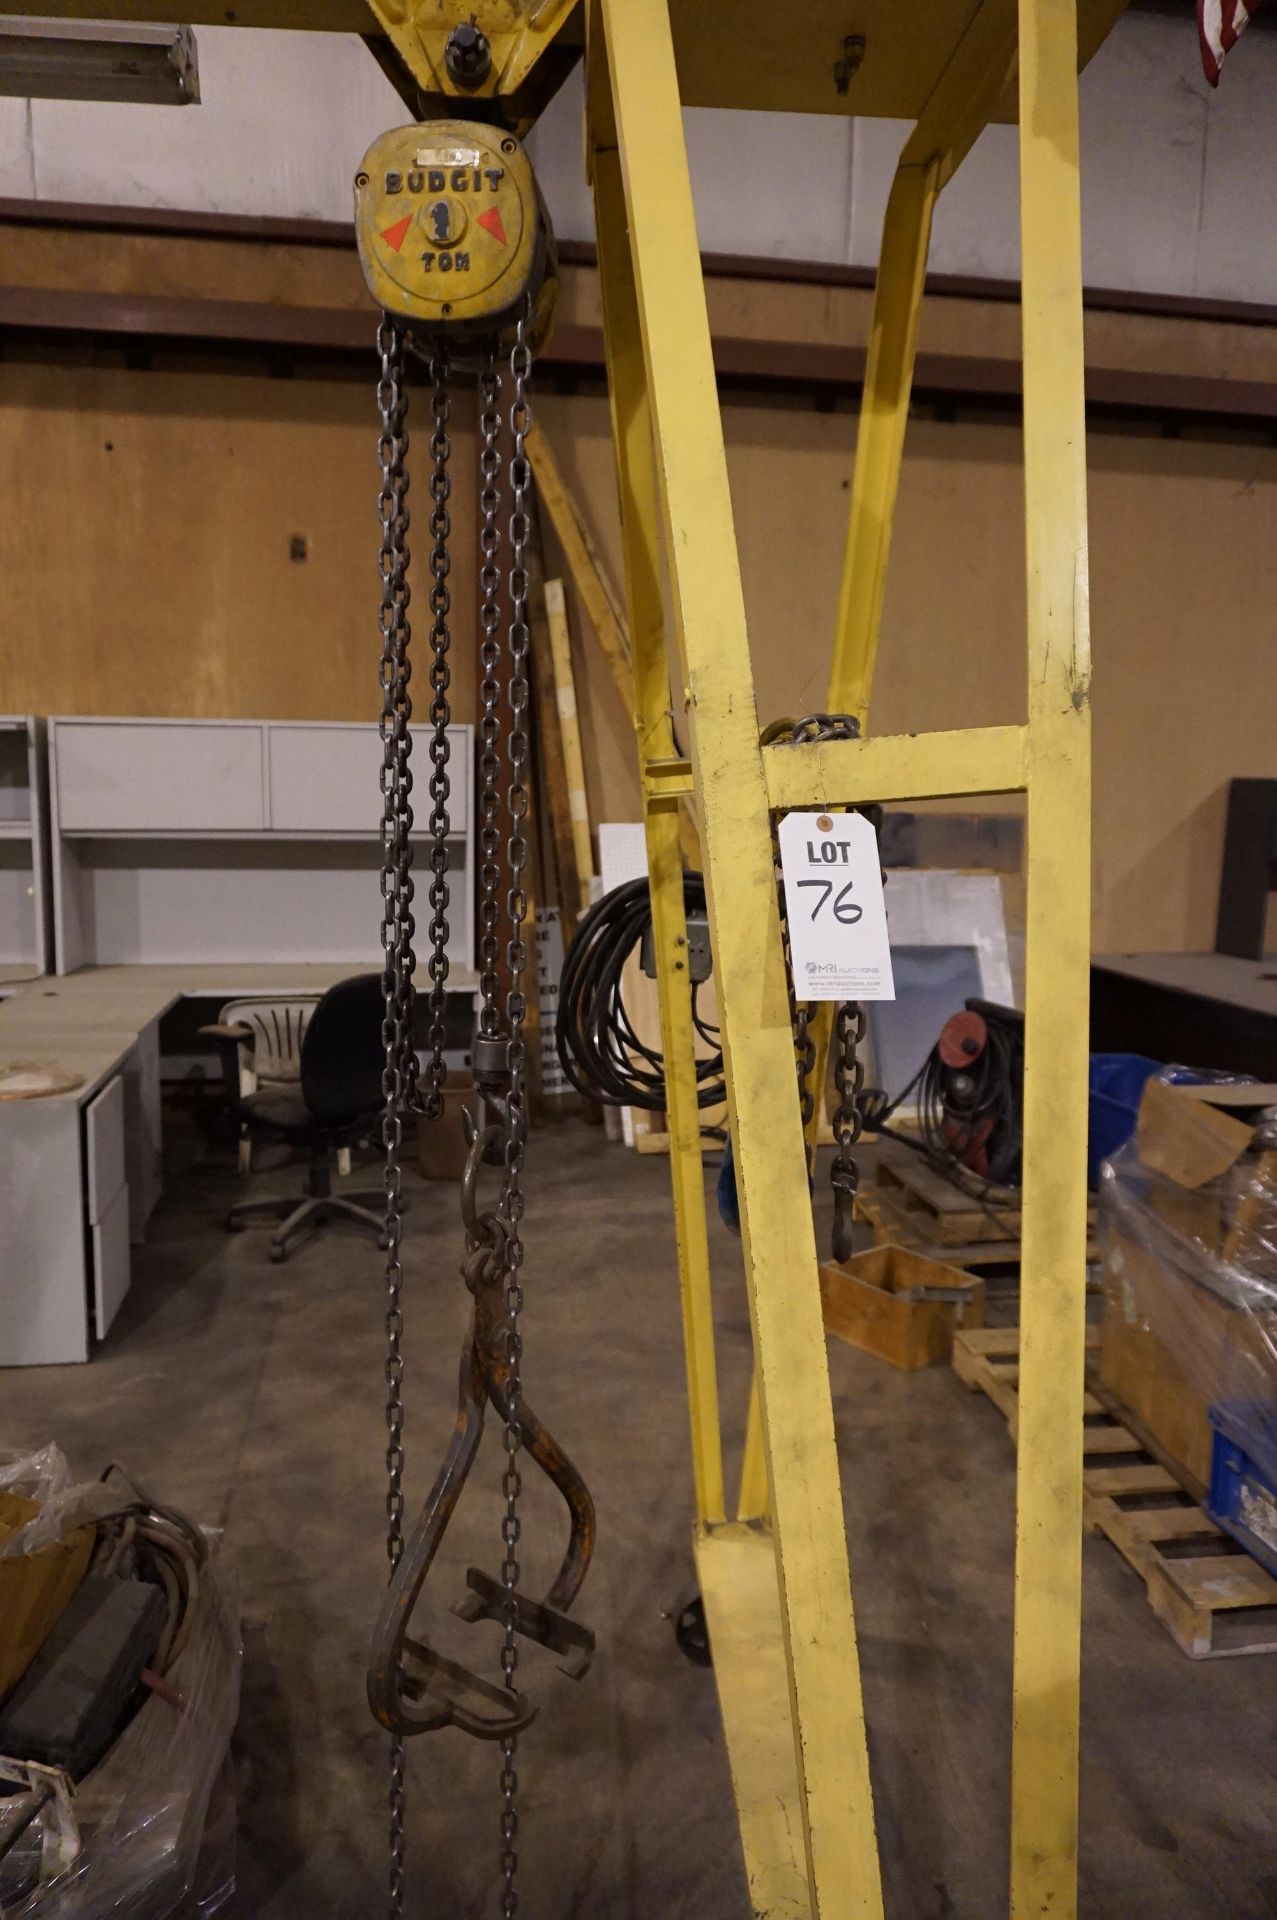 GANTRY CRANE WITH BUDGIT 1 TON HOIST, WITH RIGGING ATTACHMENTS, CHAINS, AND STRAPS - Image 2 of 3